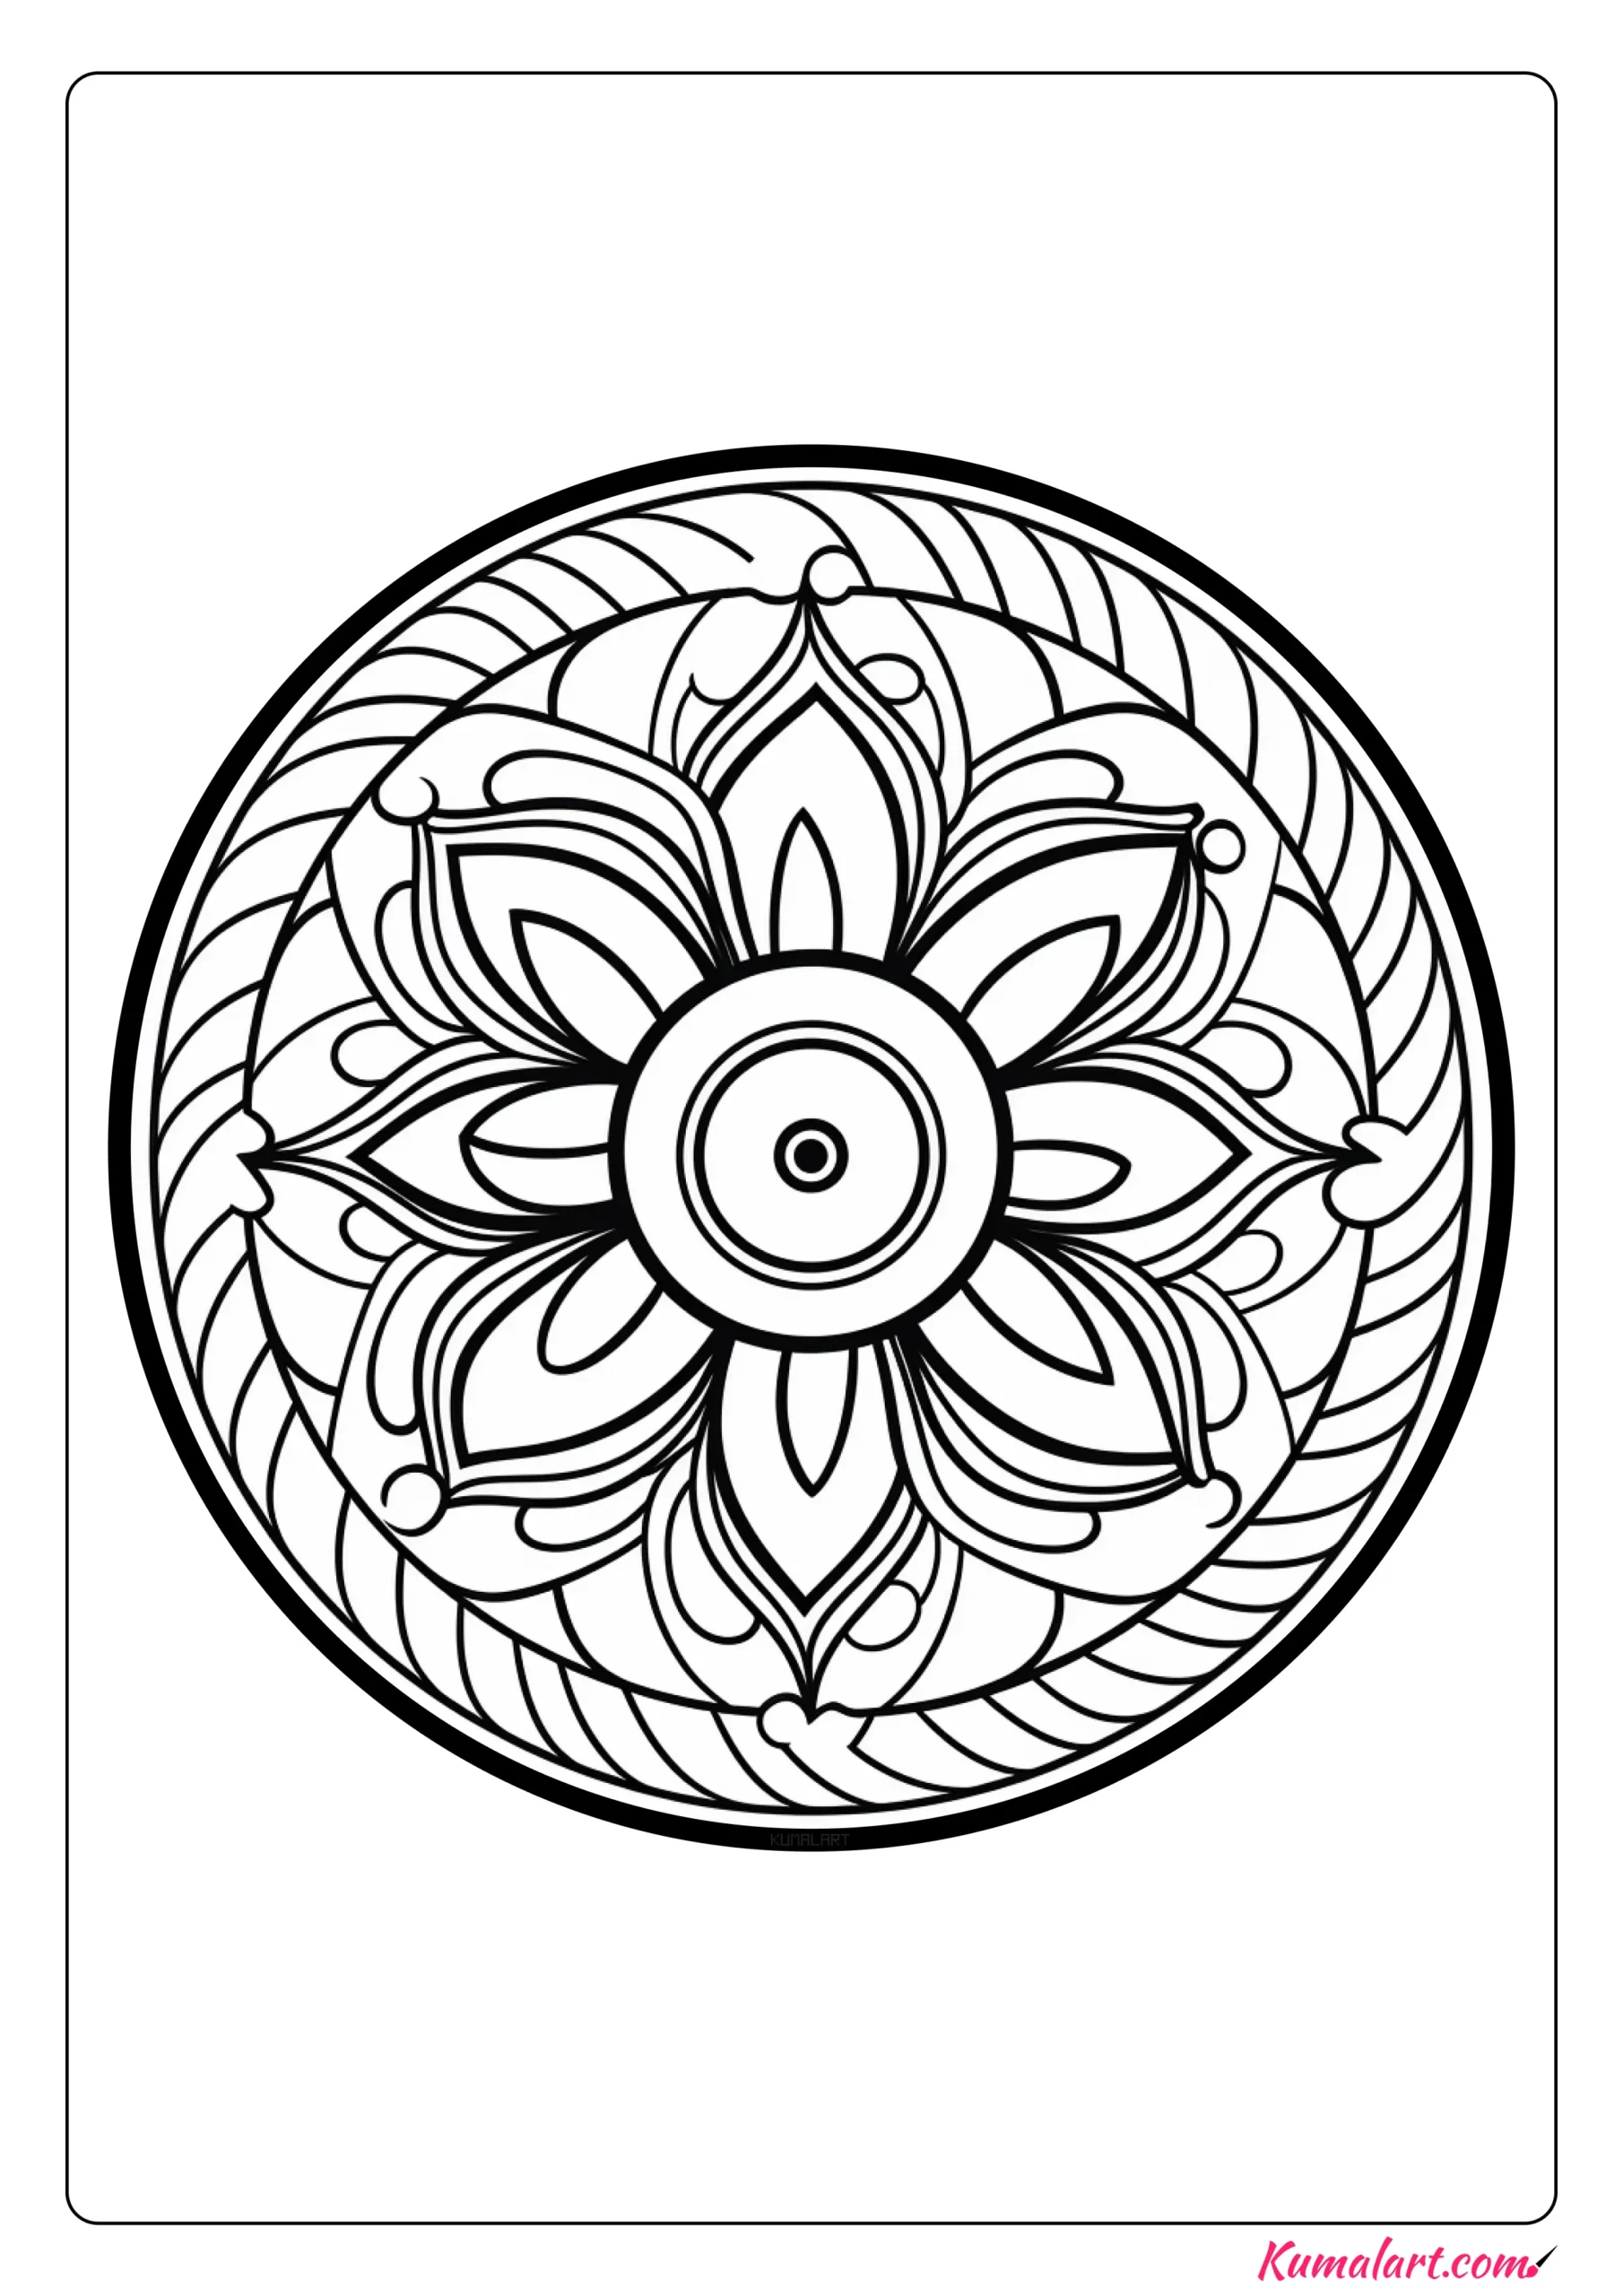 Uplifting Therapeutic Coloring Page